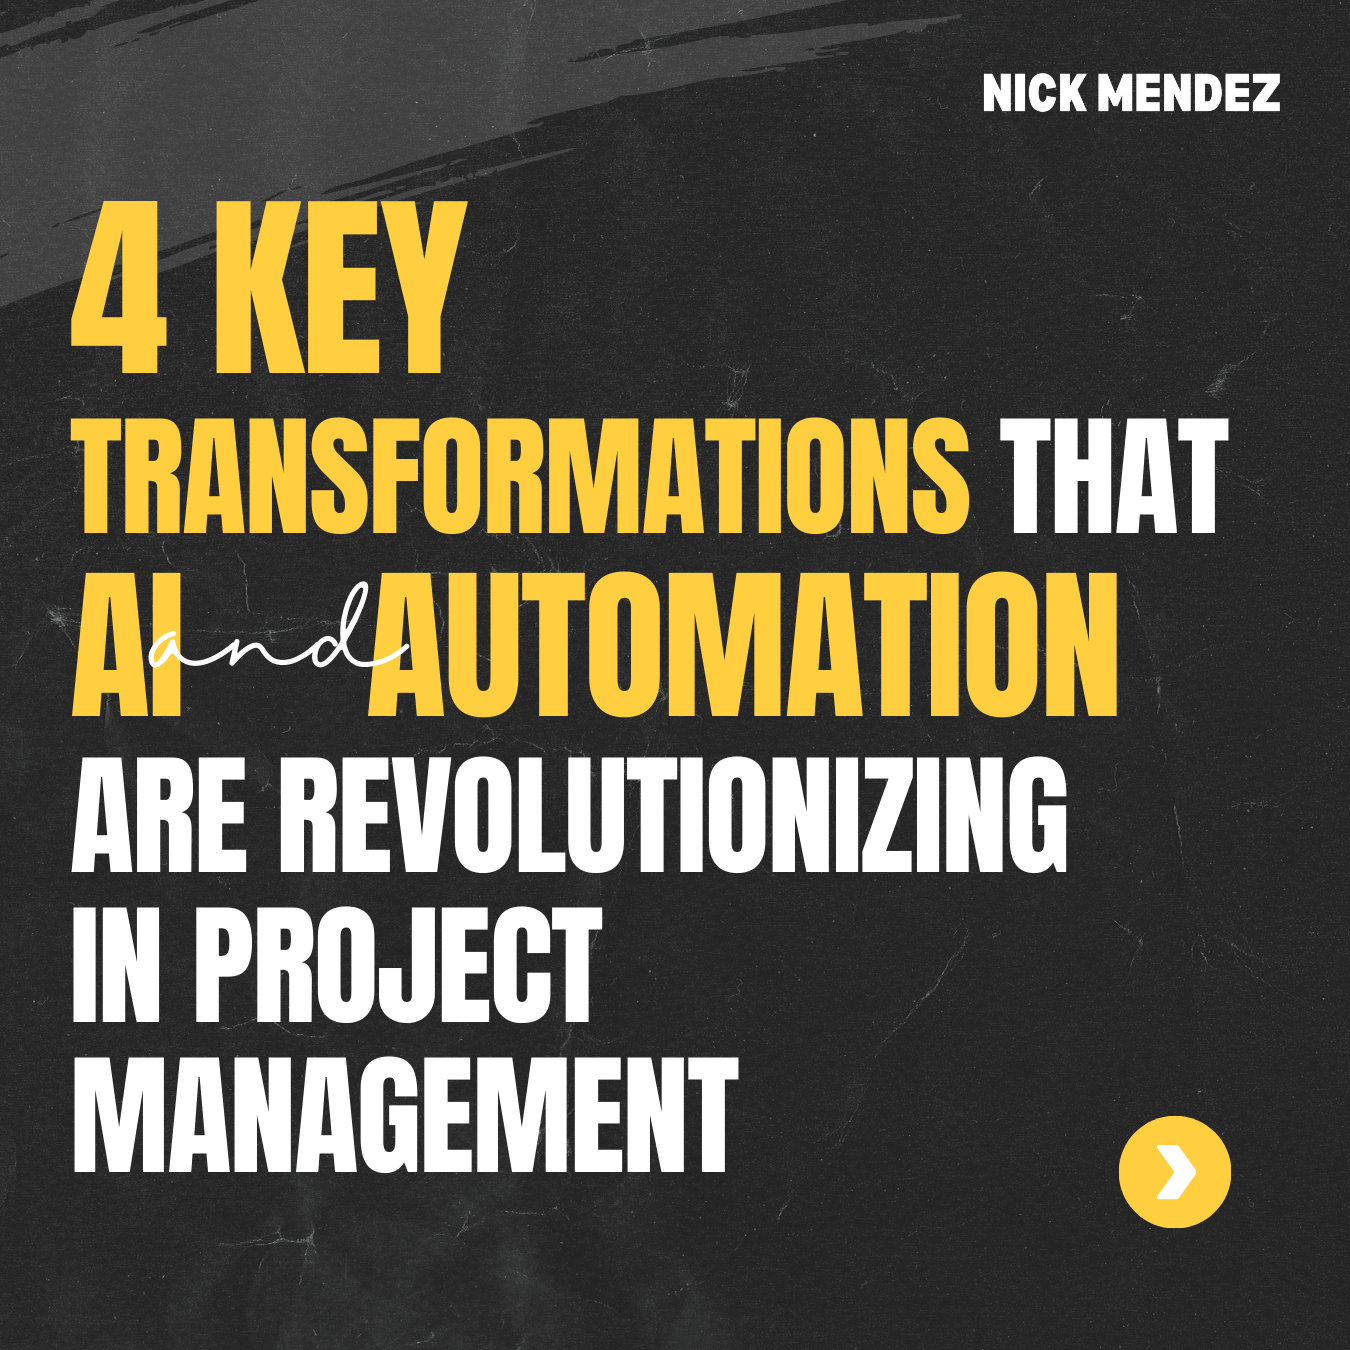 Key Transformations That AI and Automation Are Revolutionizing in Project Management by Nick Mendez